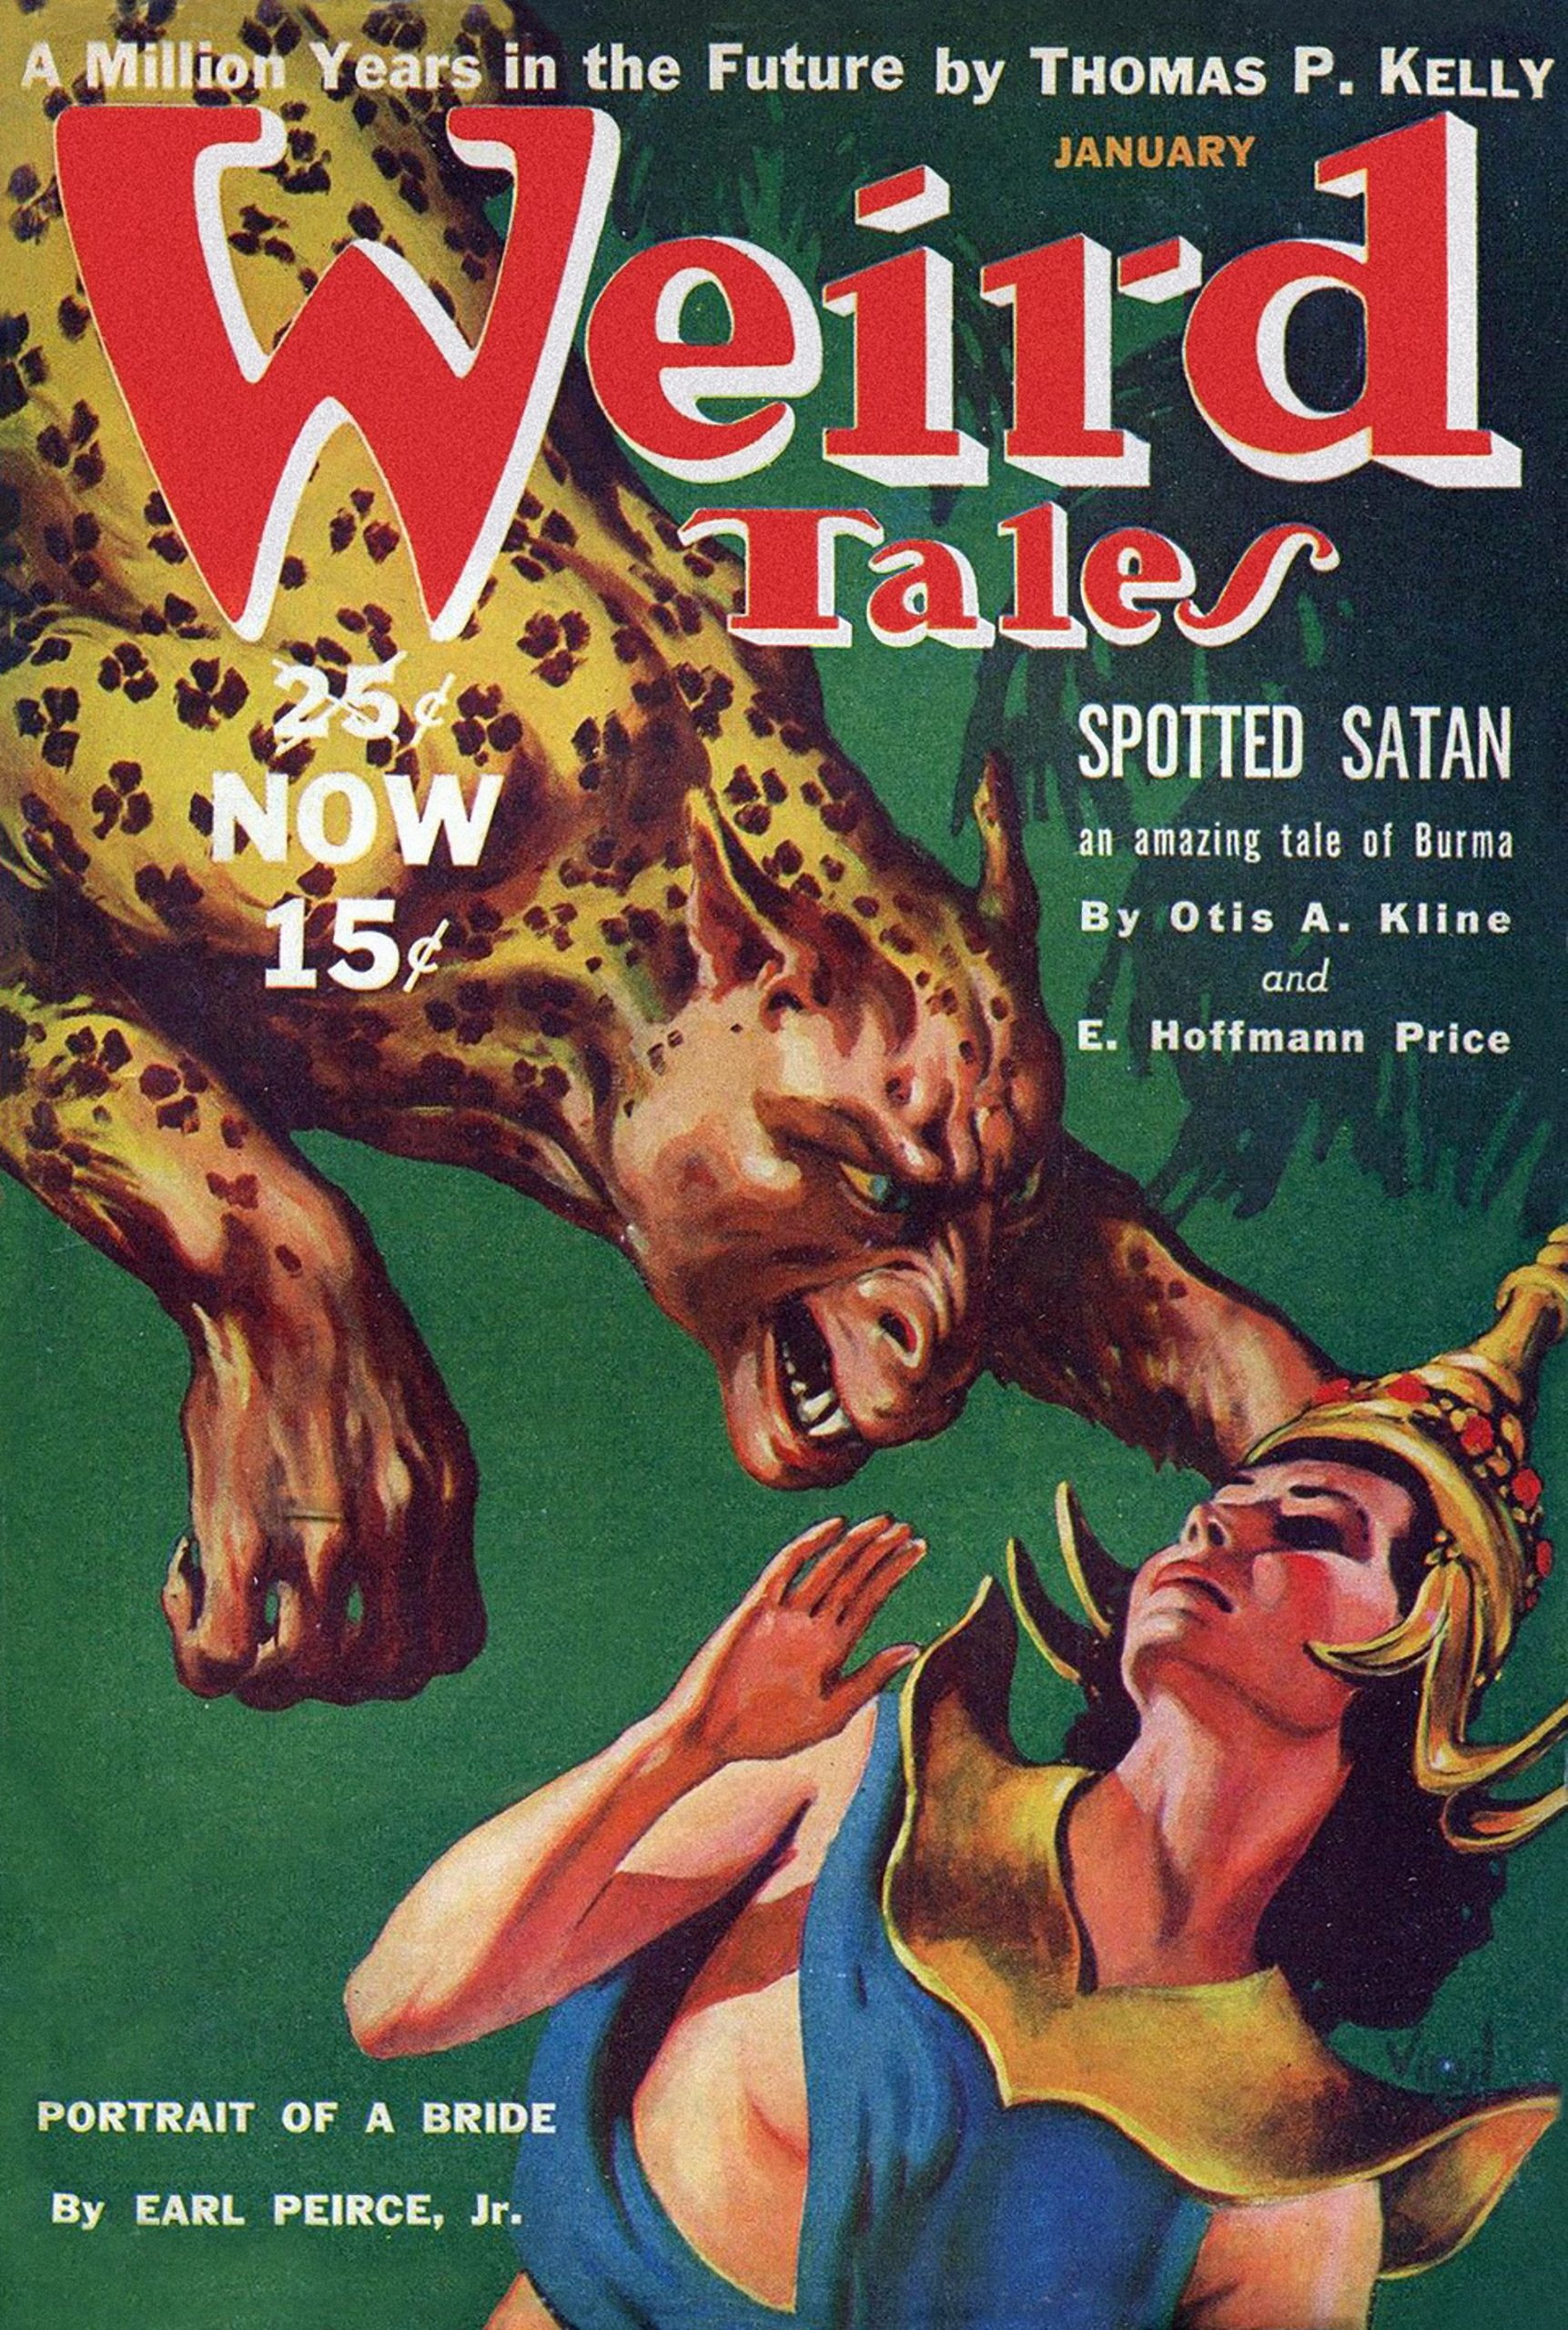 A weird-looking giant cat assaults a woman on the January 1940 cover of Weird Tales, as painted by Virgil finlay.